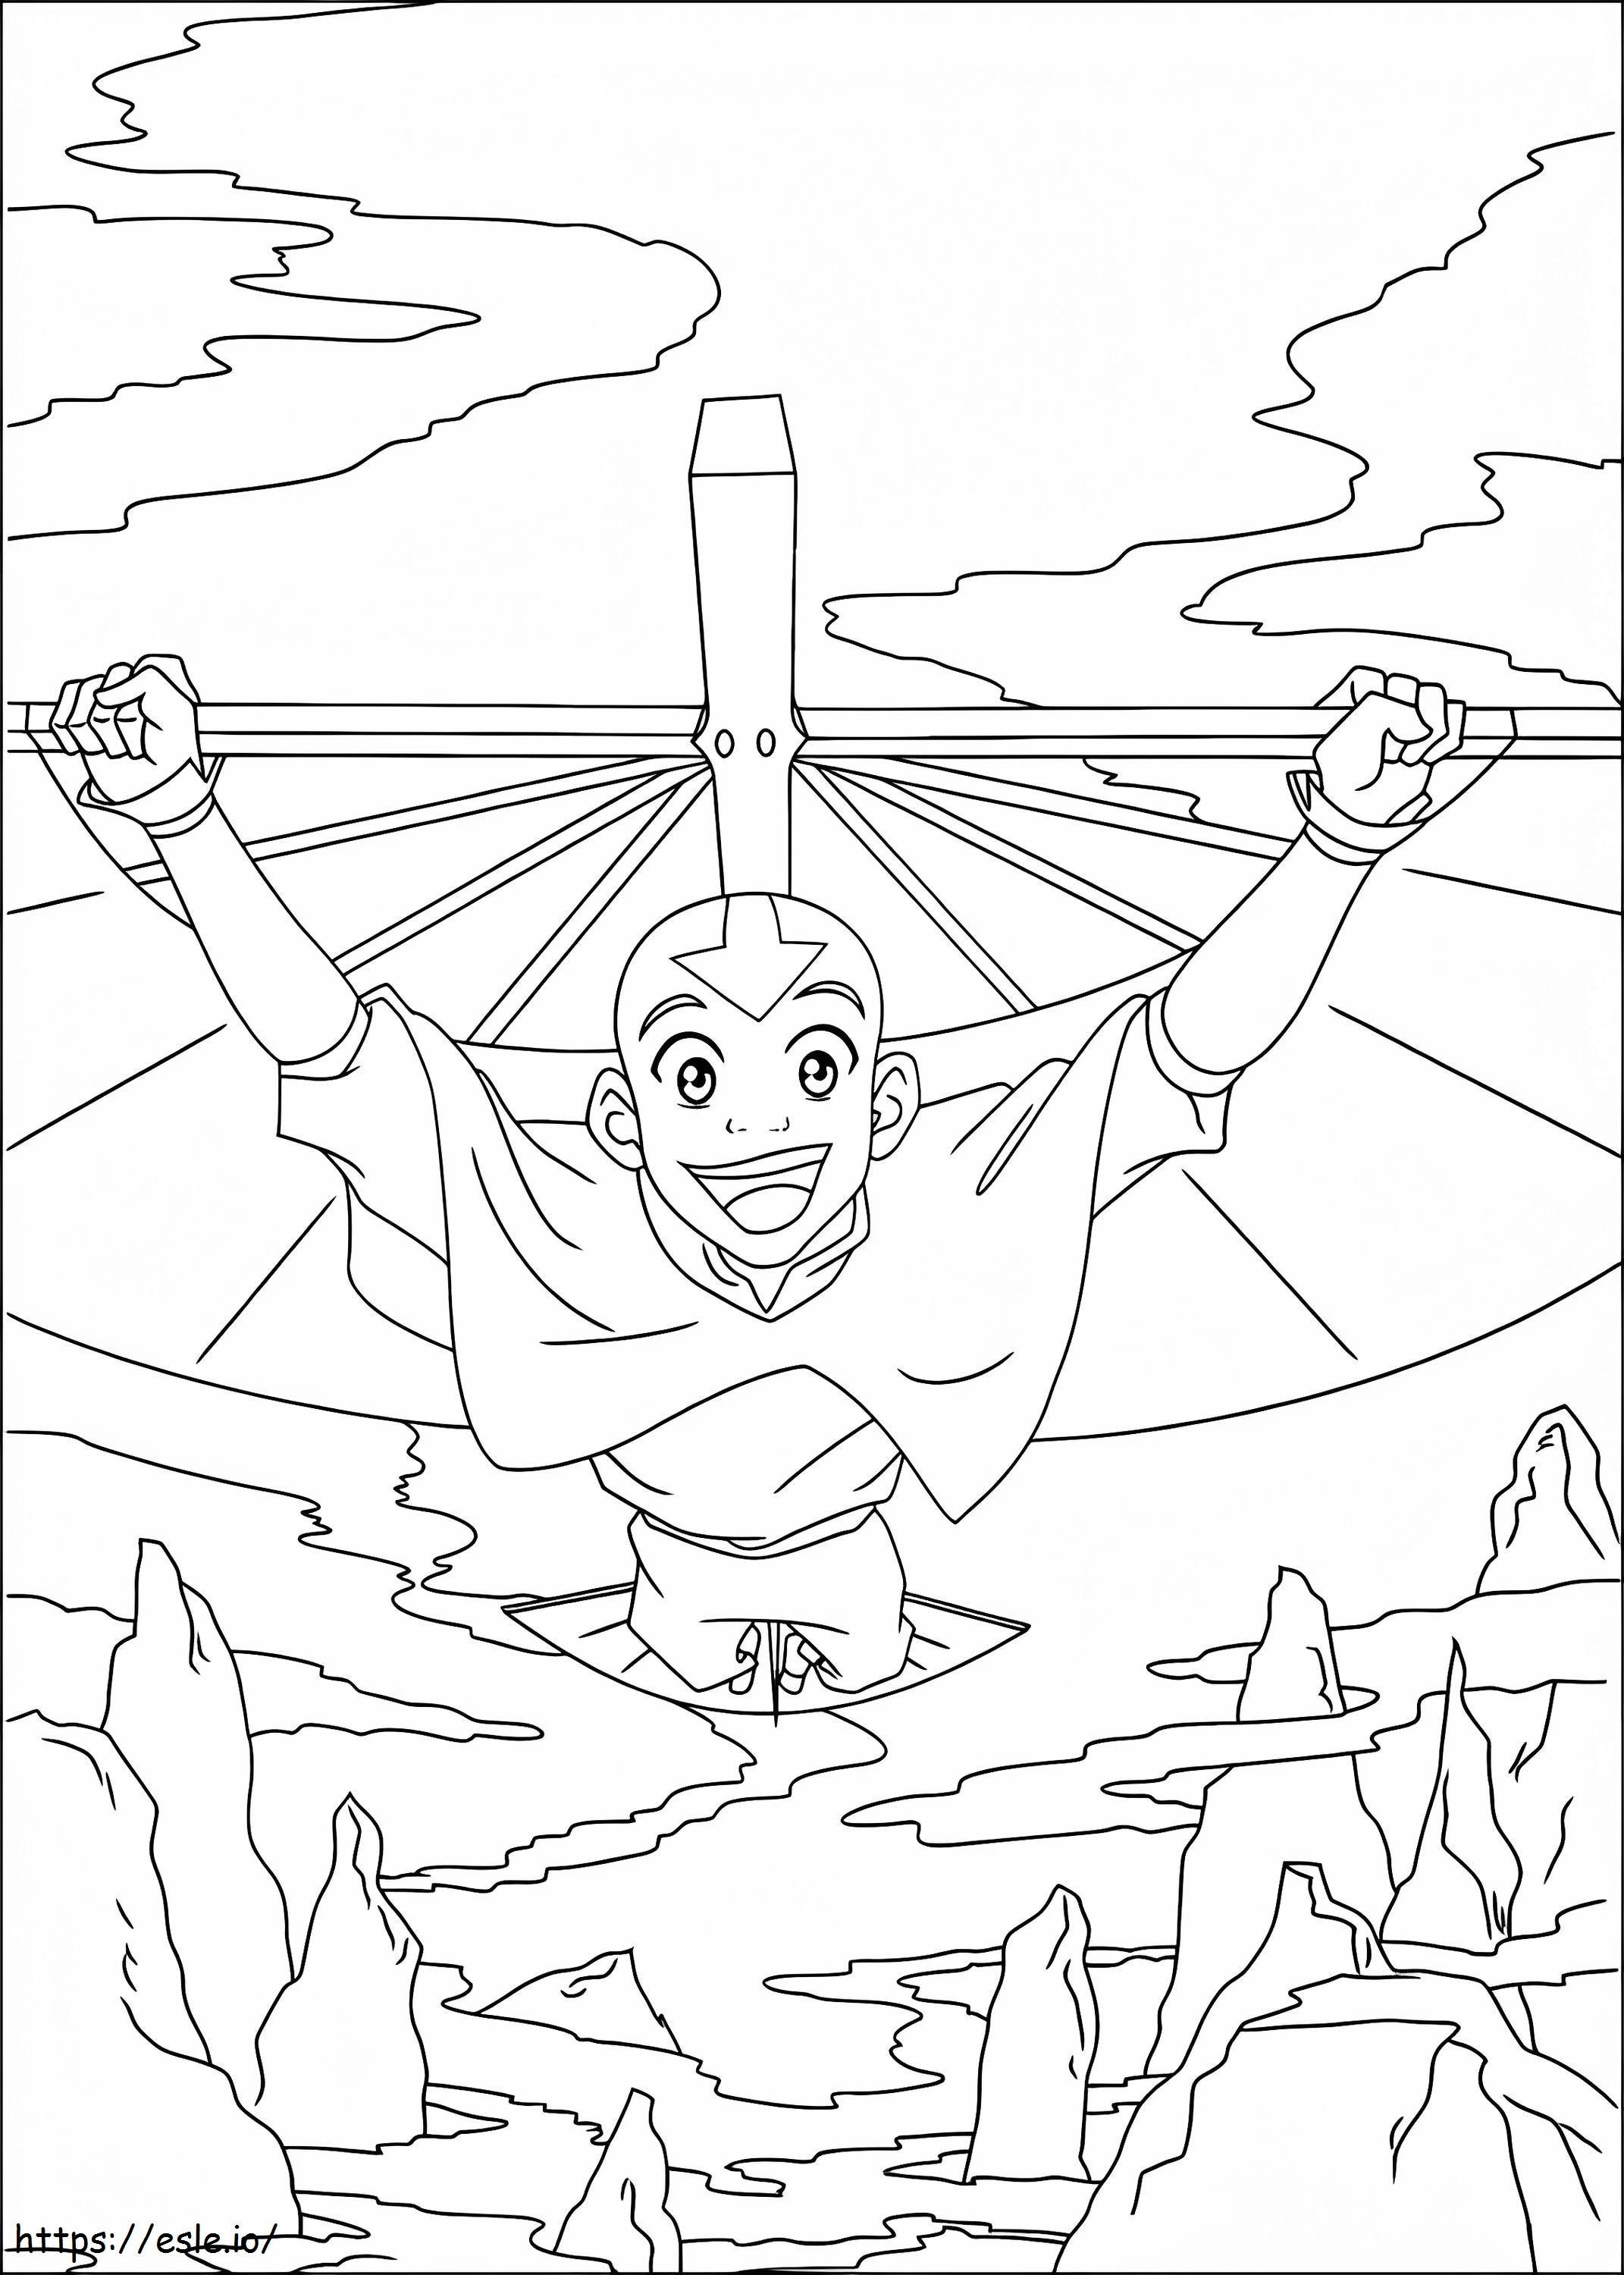 1533692447 Aang Flying A4 coloring page